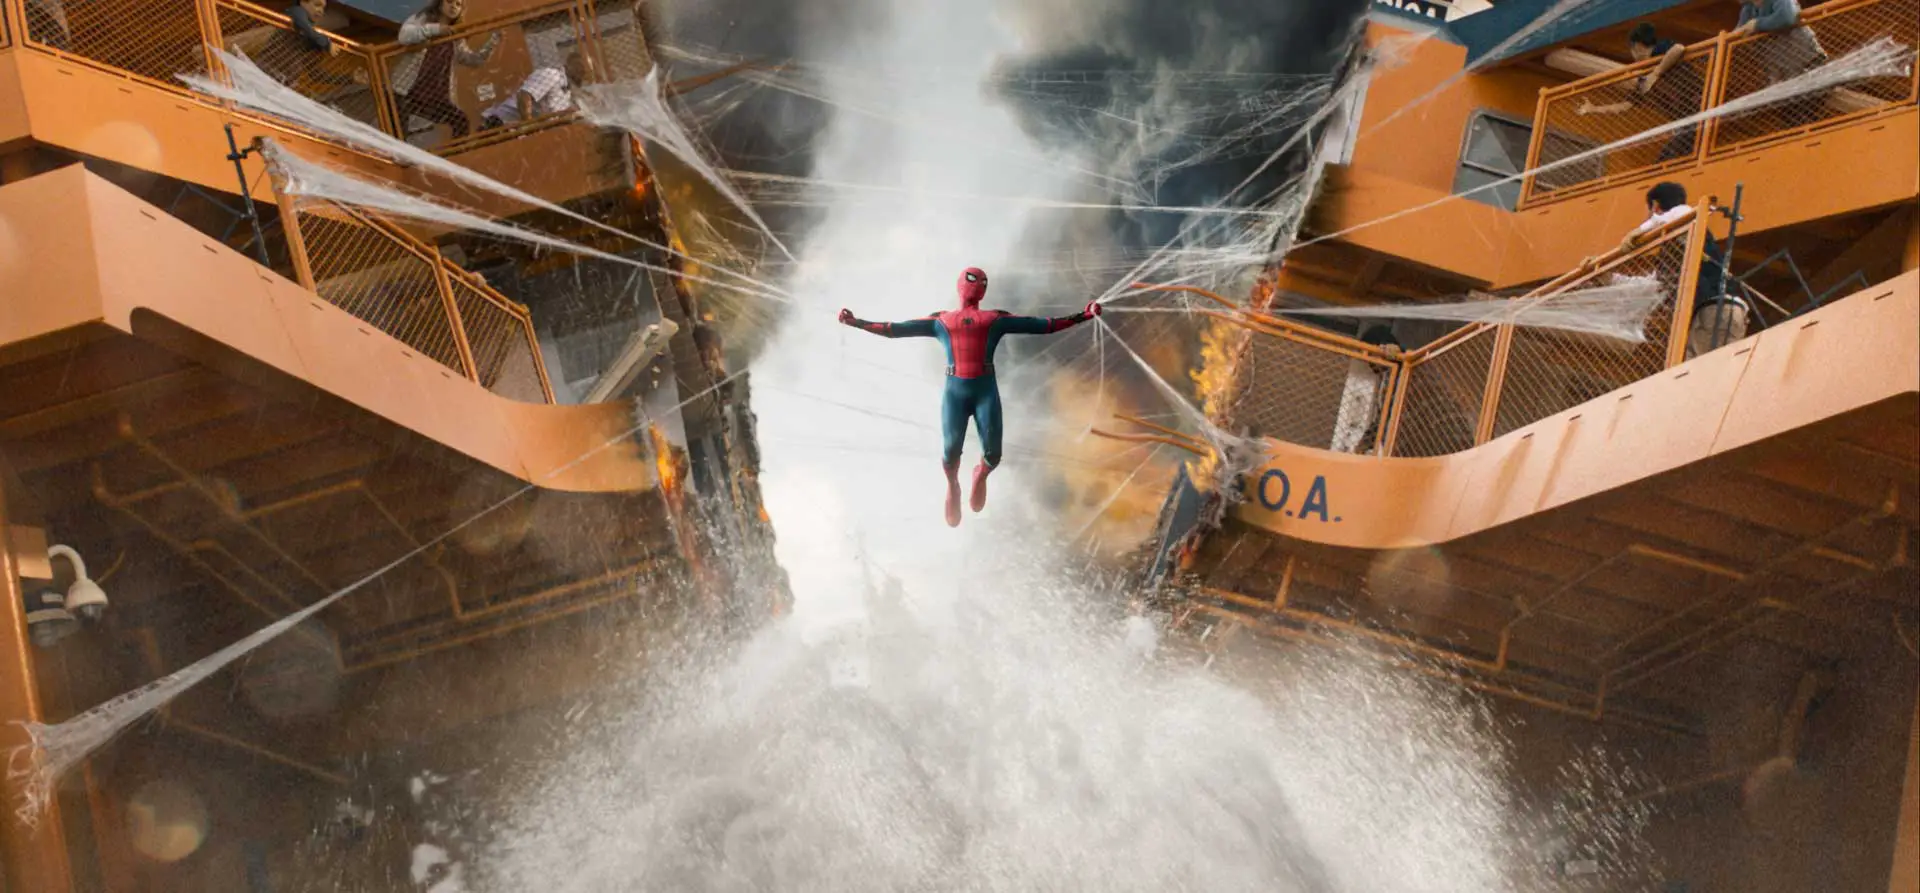 Spider-Man: Homecoming Download | MadDownload.com